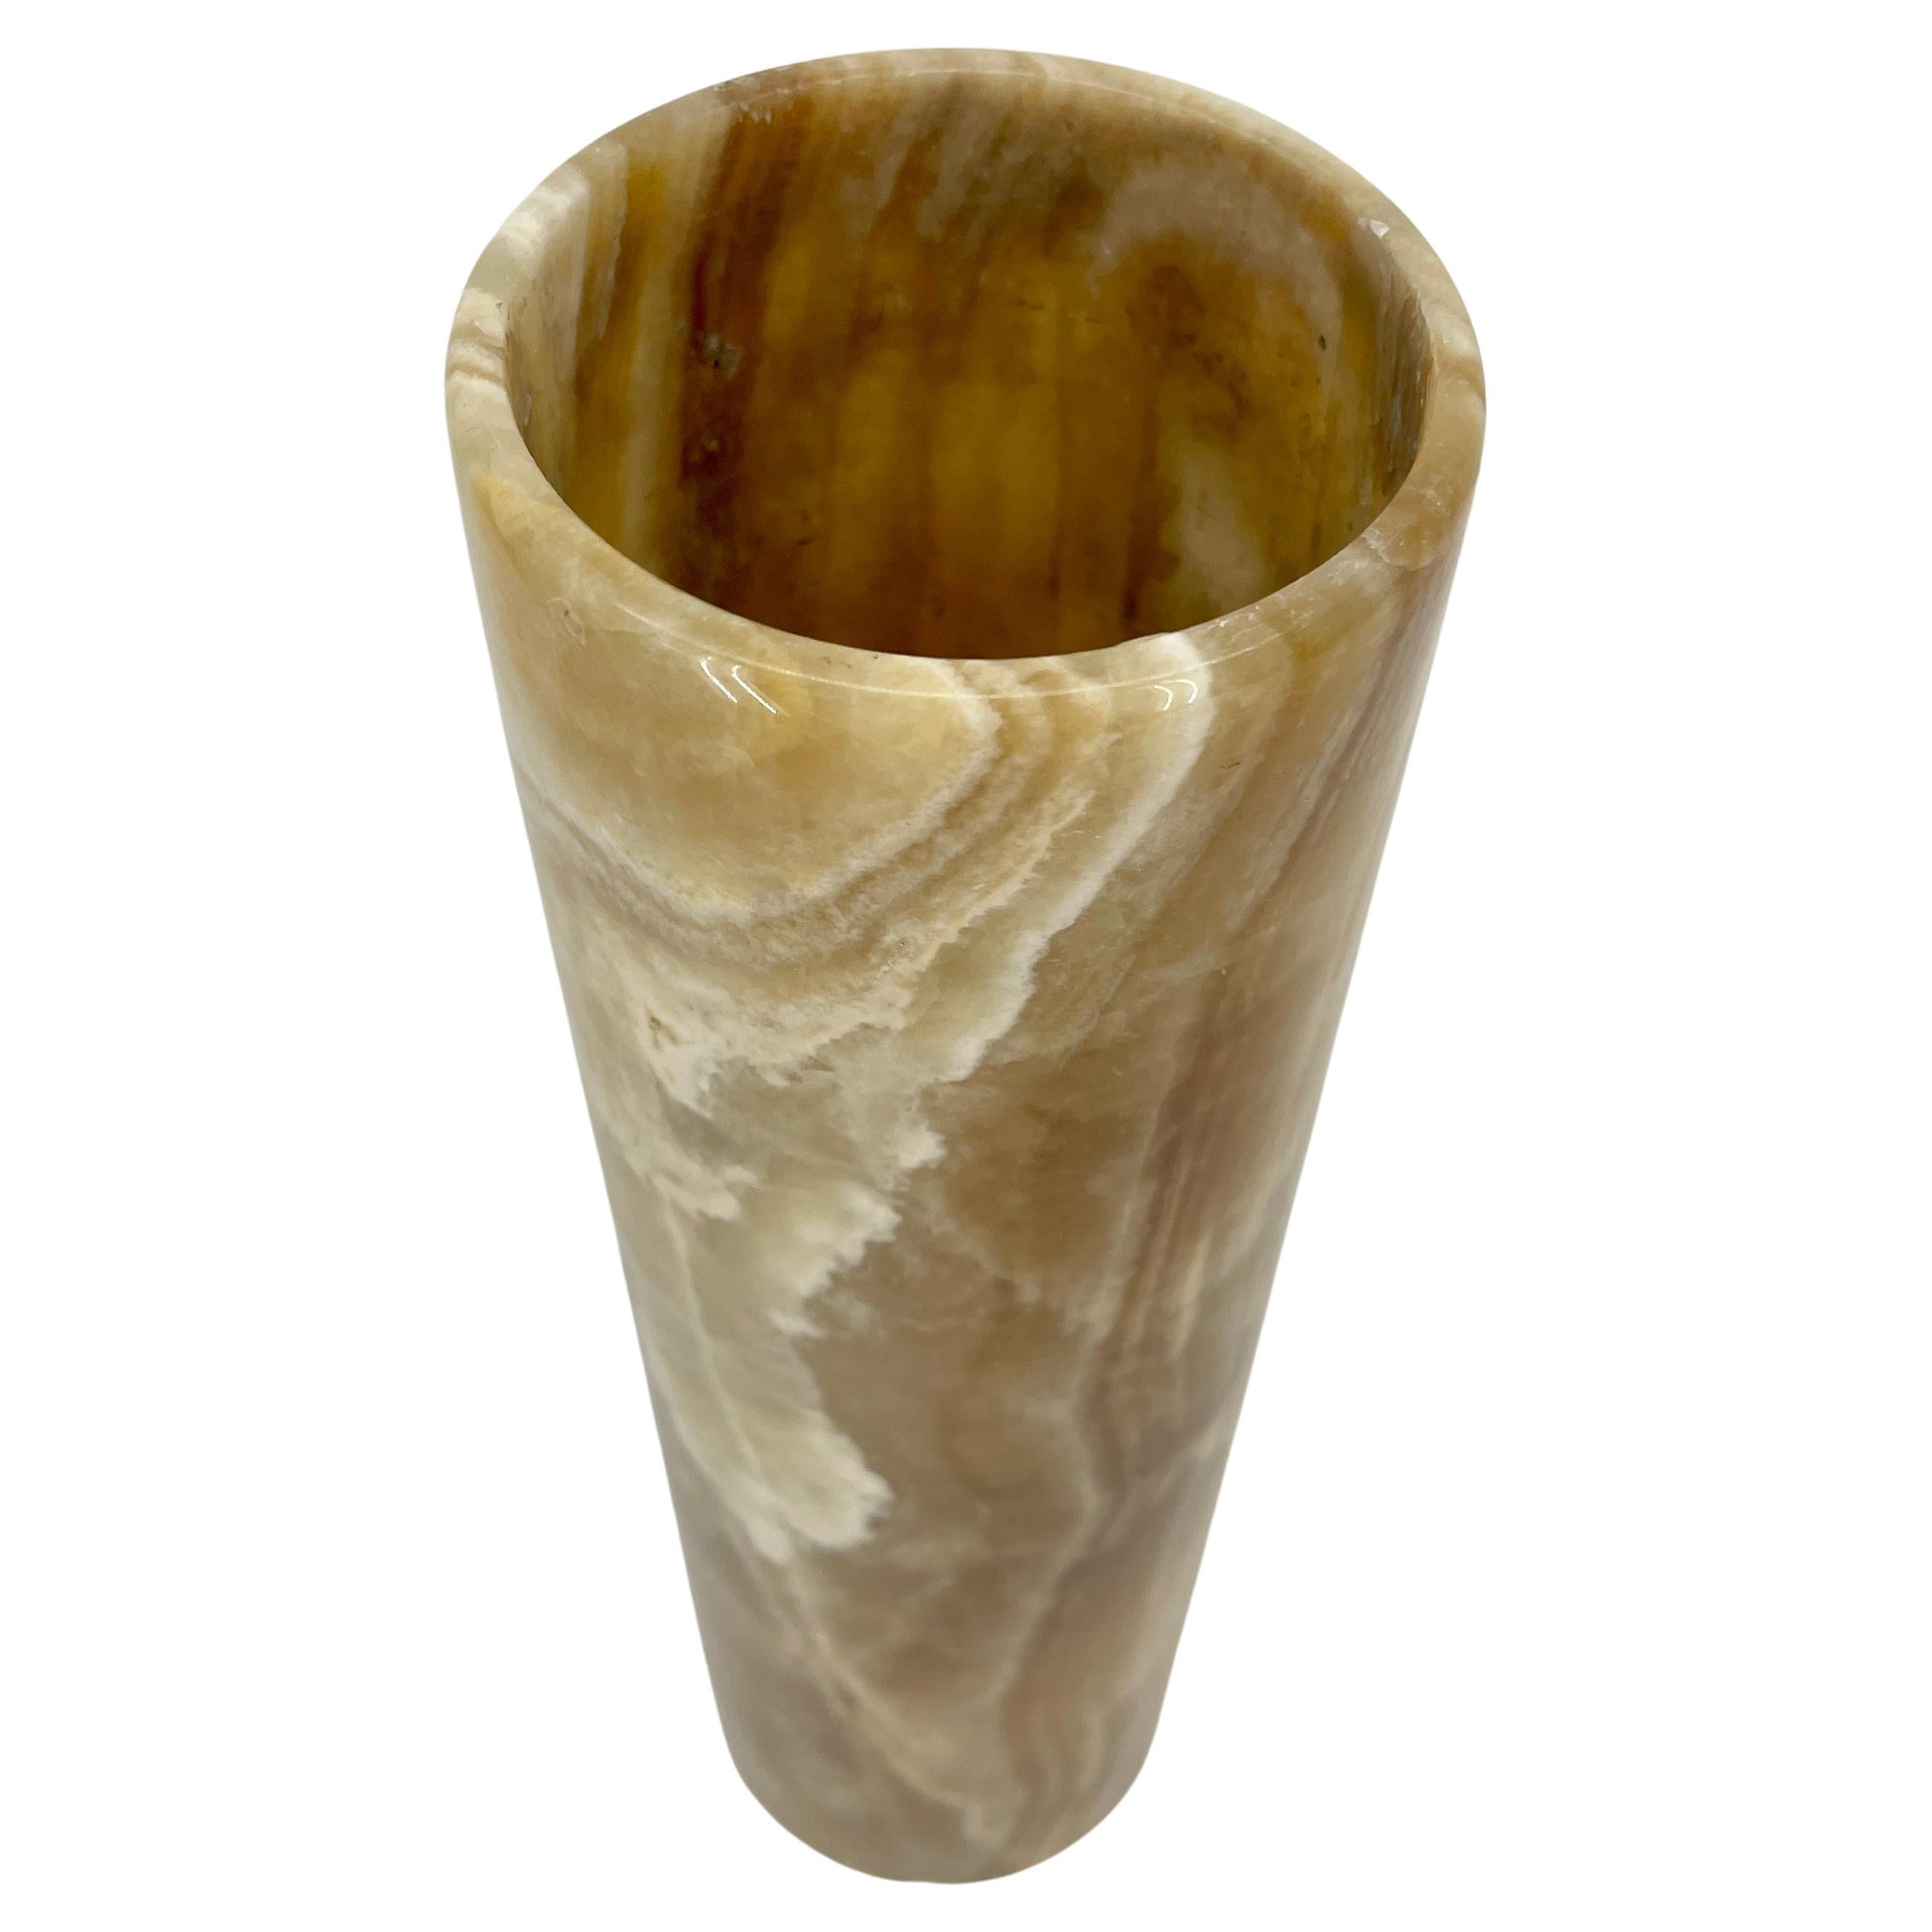 Tall hand-crafted cylindric decorative vase in Onyx.